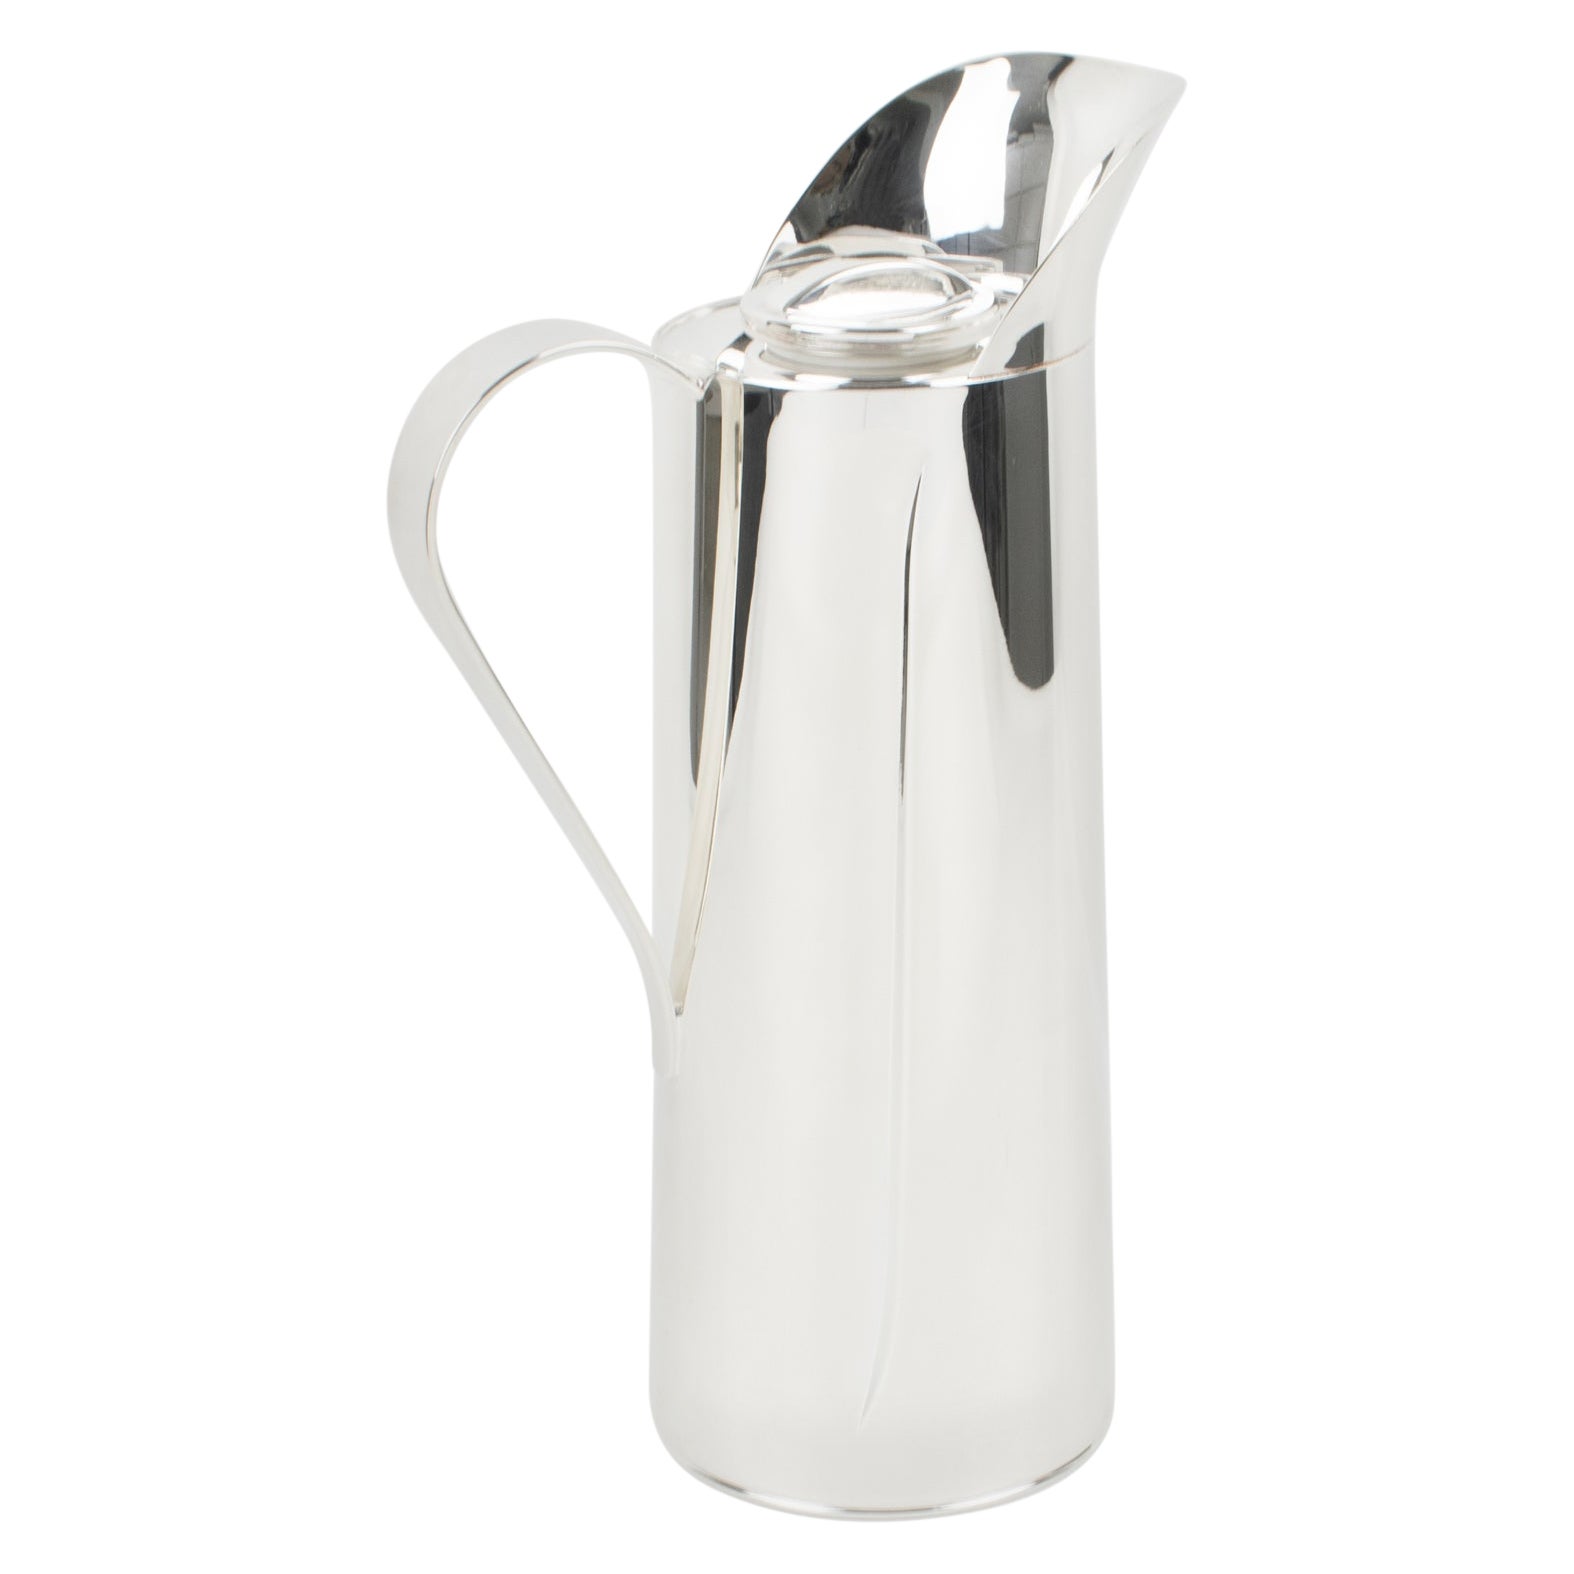 Thermal jug Vie in silver plated - handmade in Italy in our Zanetto